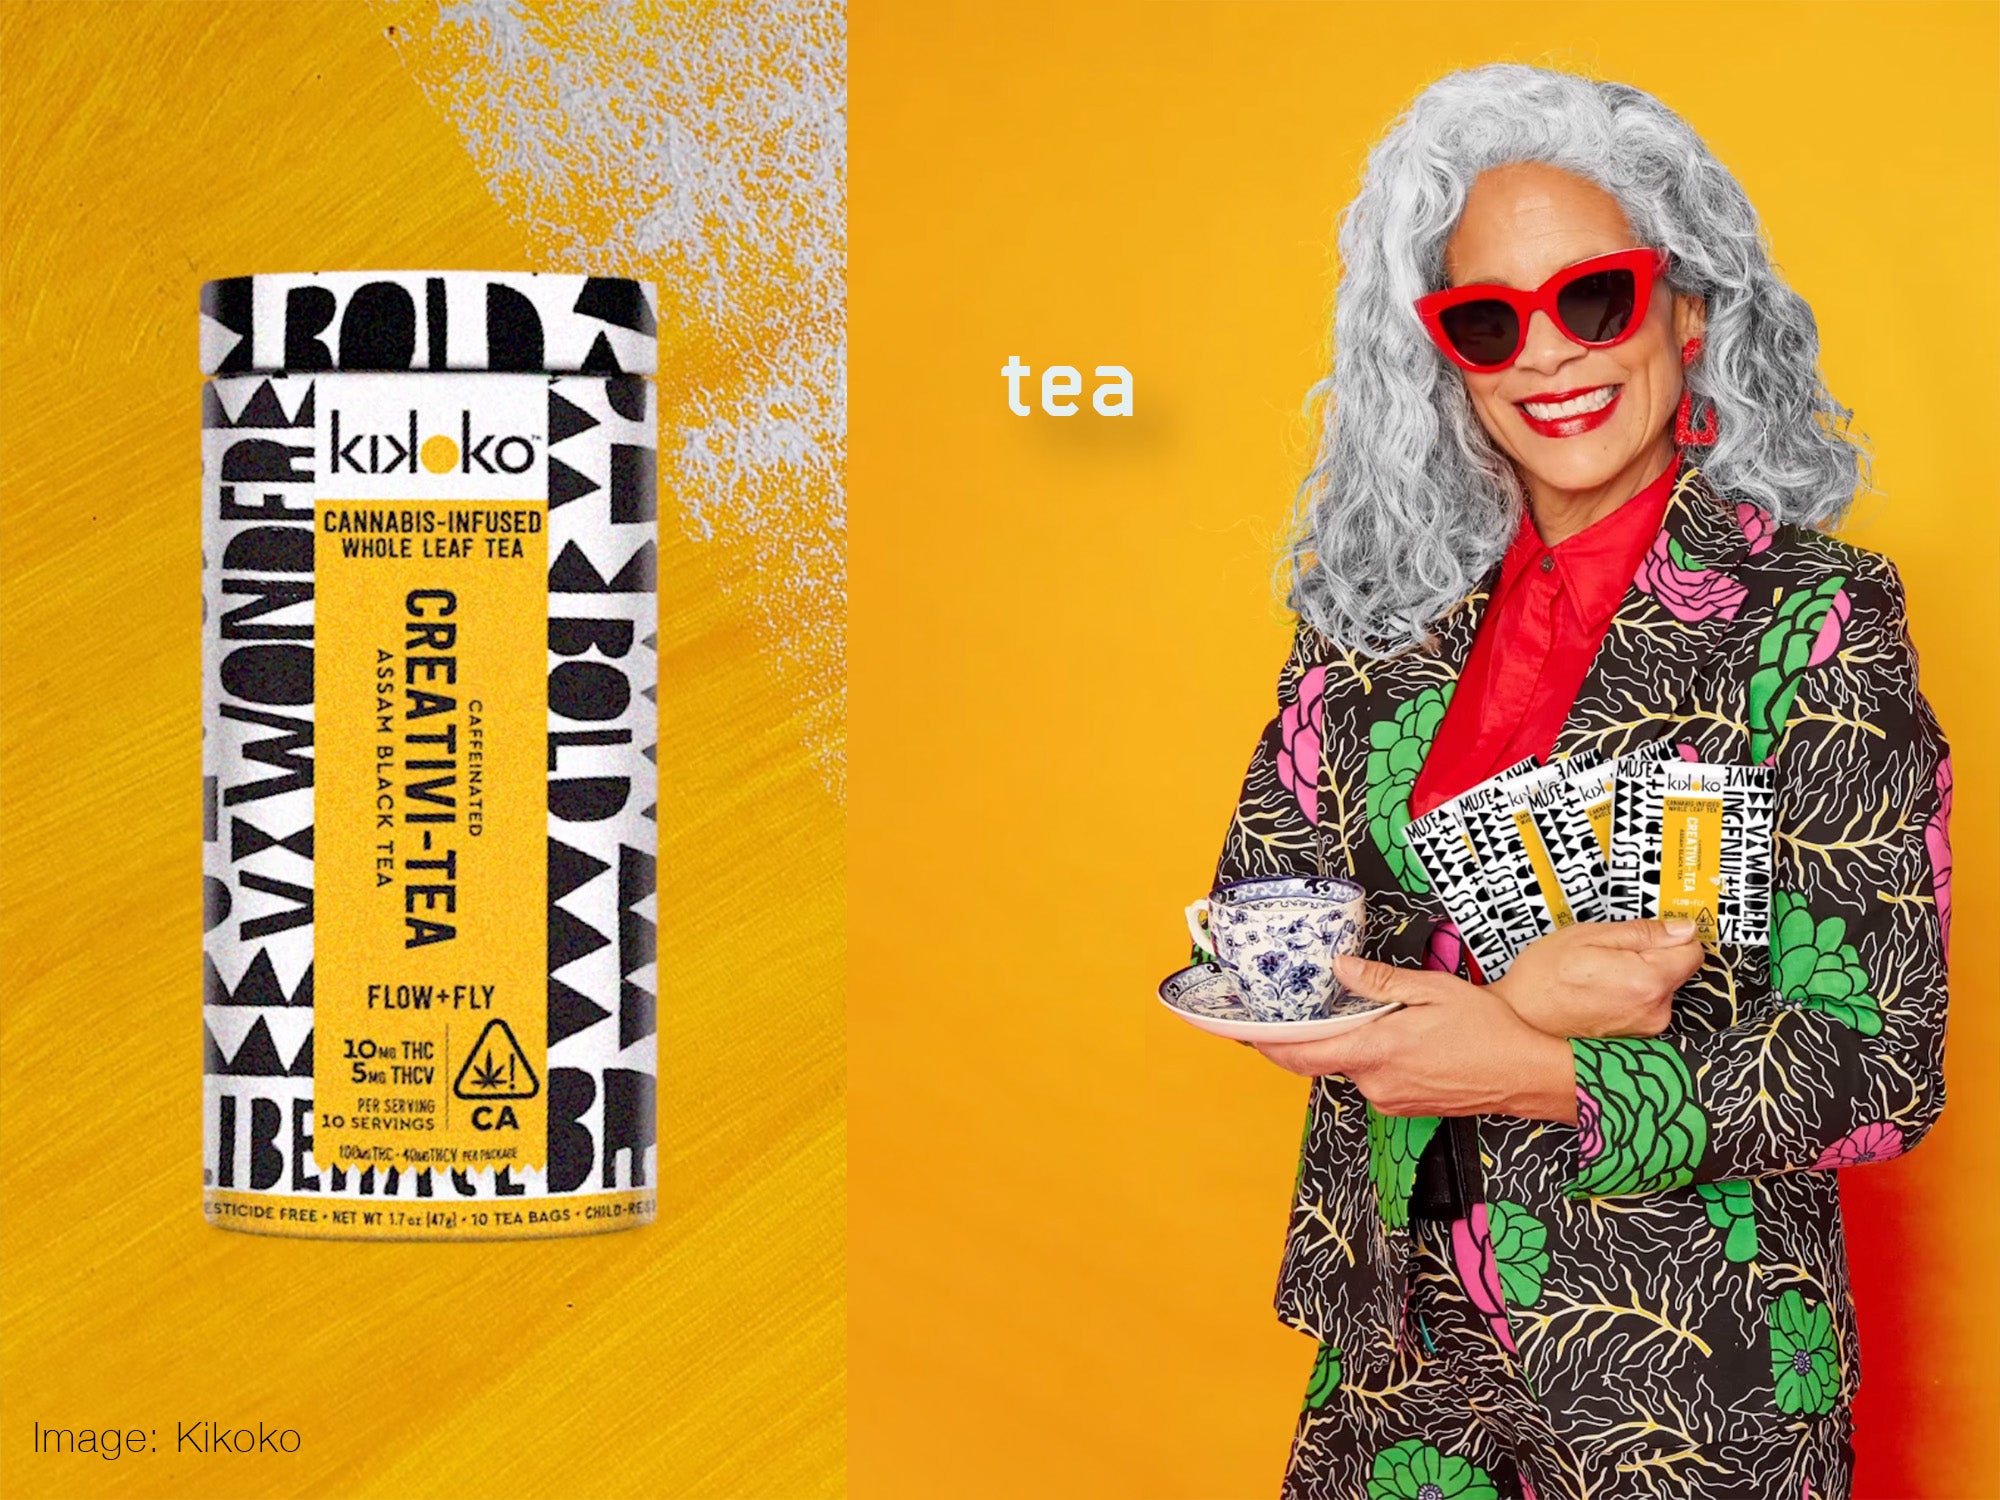 Box of tea close up on a yellow surface on the left, and on the right a woman with long white hair, red rimmed glasses, and a bright patterned suite holding several boxes of the same tea pictured on the left.